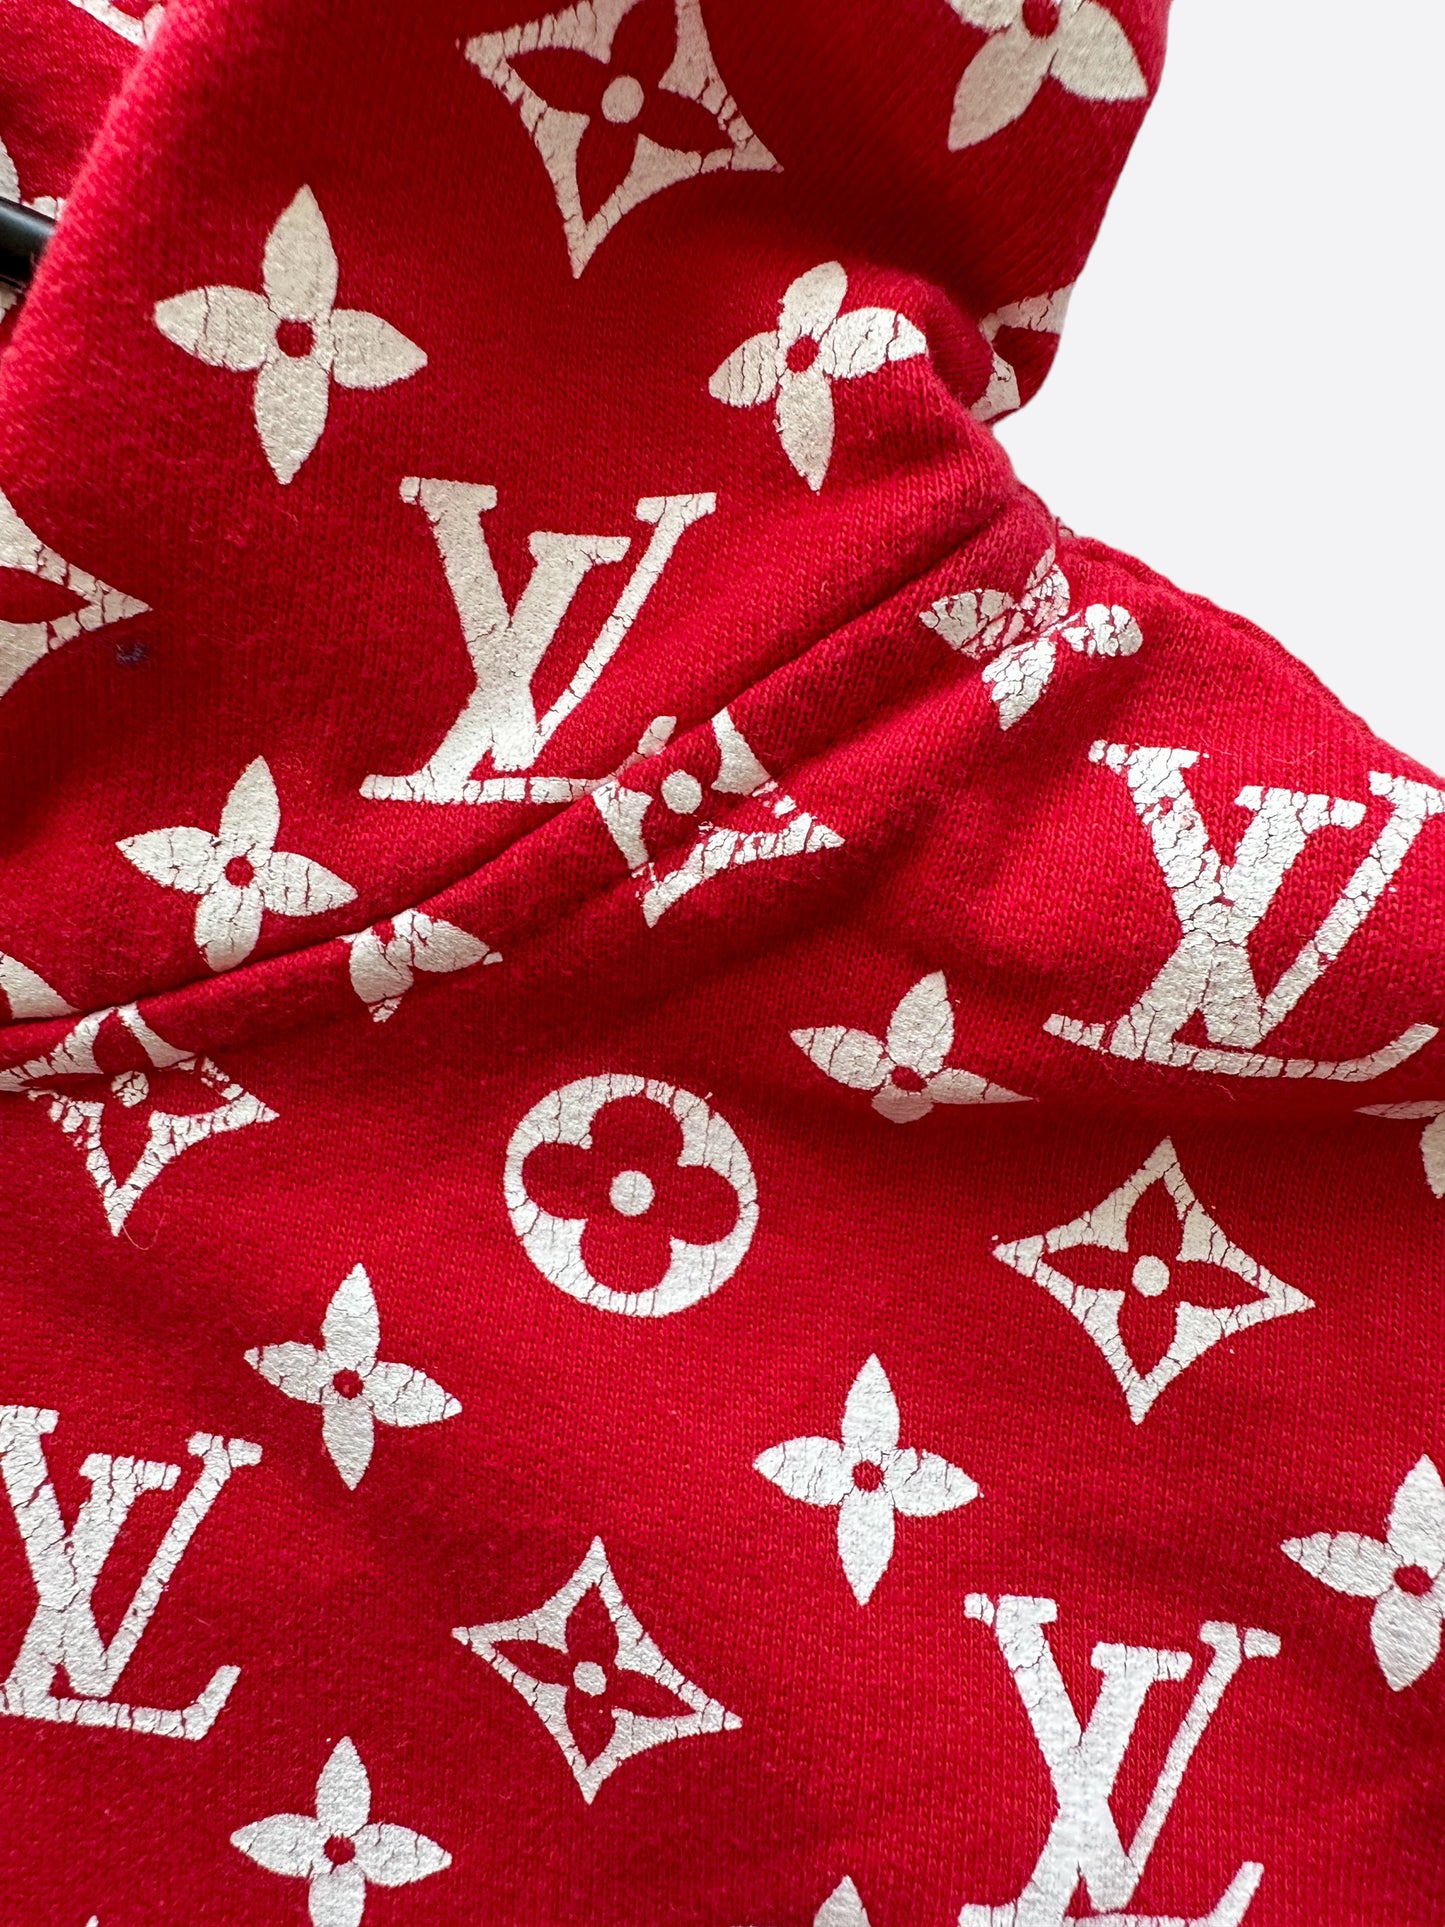 Supreme Louis Vuitton Red Monogram With Snoopy Heavyweight Pullover Hoodie  Sweatshirt - Shop trending fashion in USA and EU